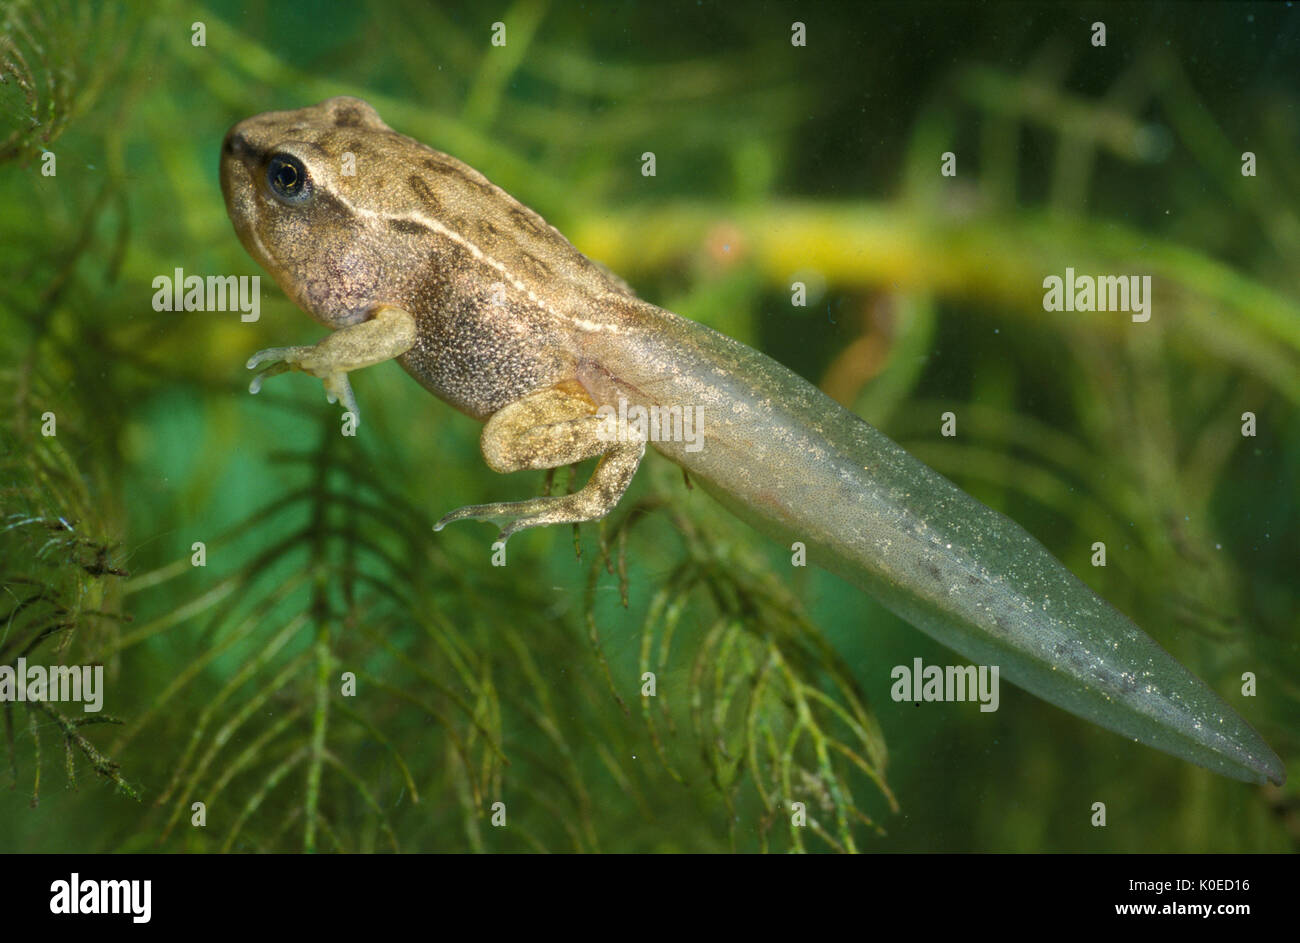 Common frog (Rana temporaria) - tadpole with front and back leg developed, with tail, part of lifecycle development Stock Photo